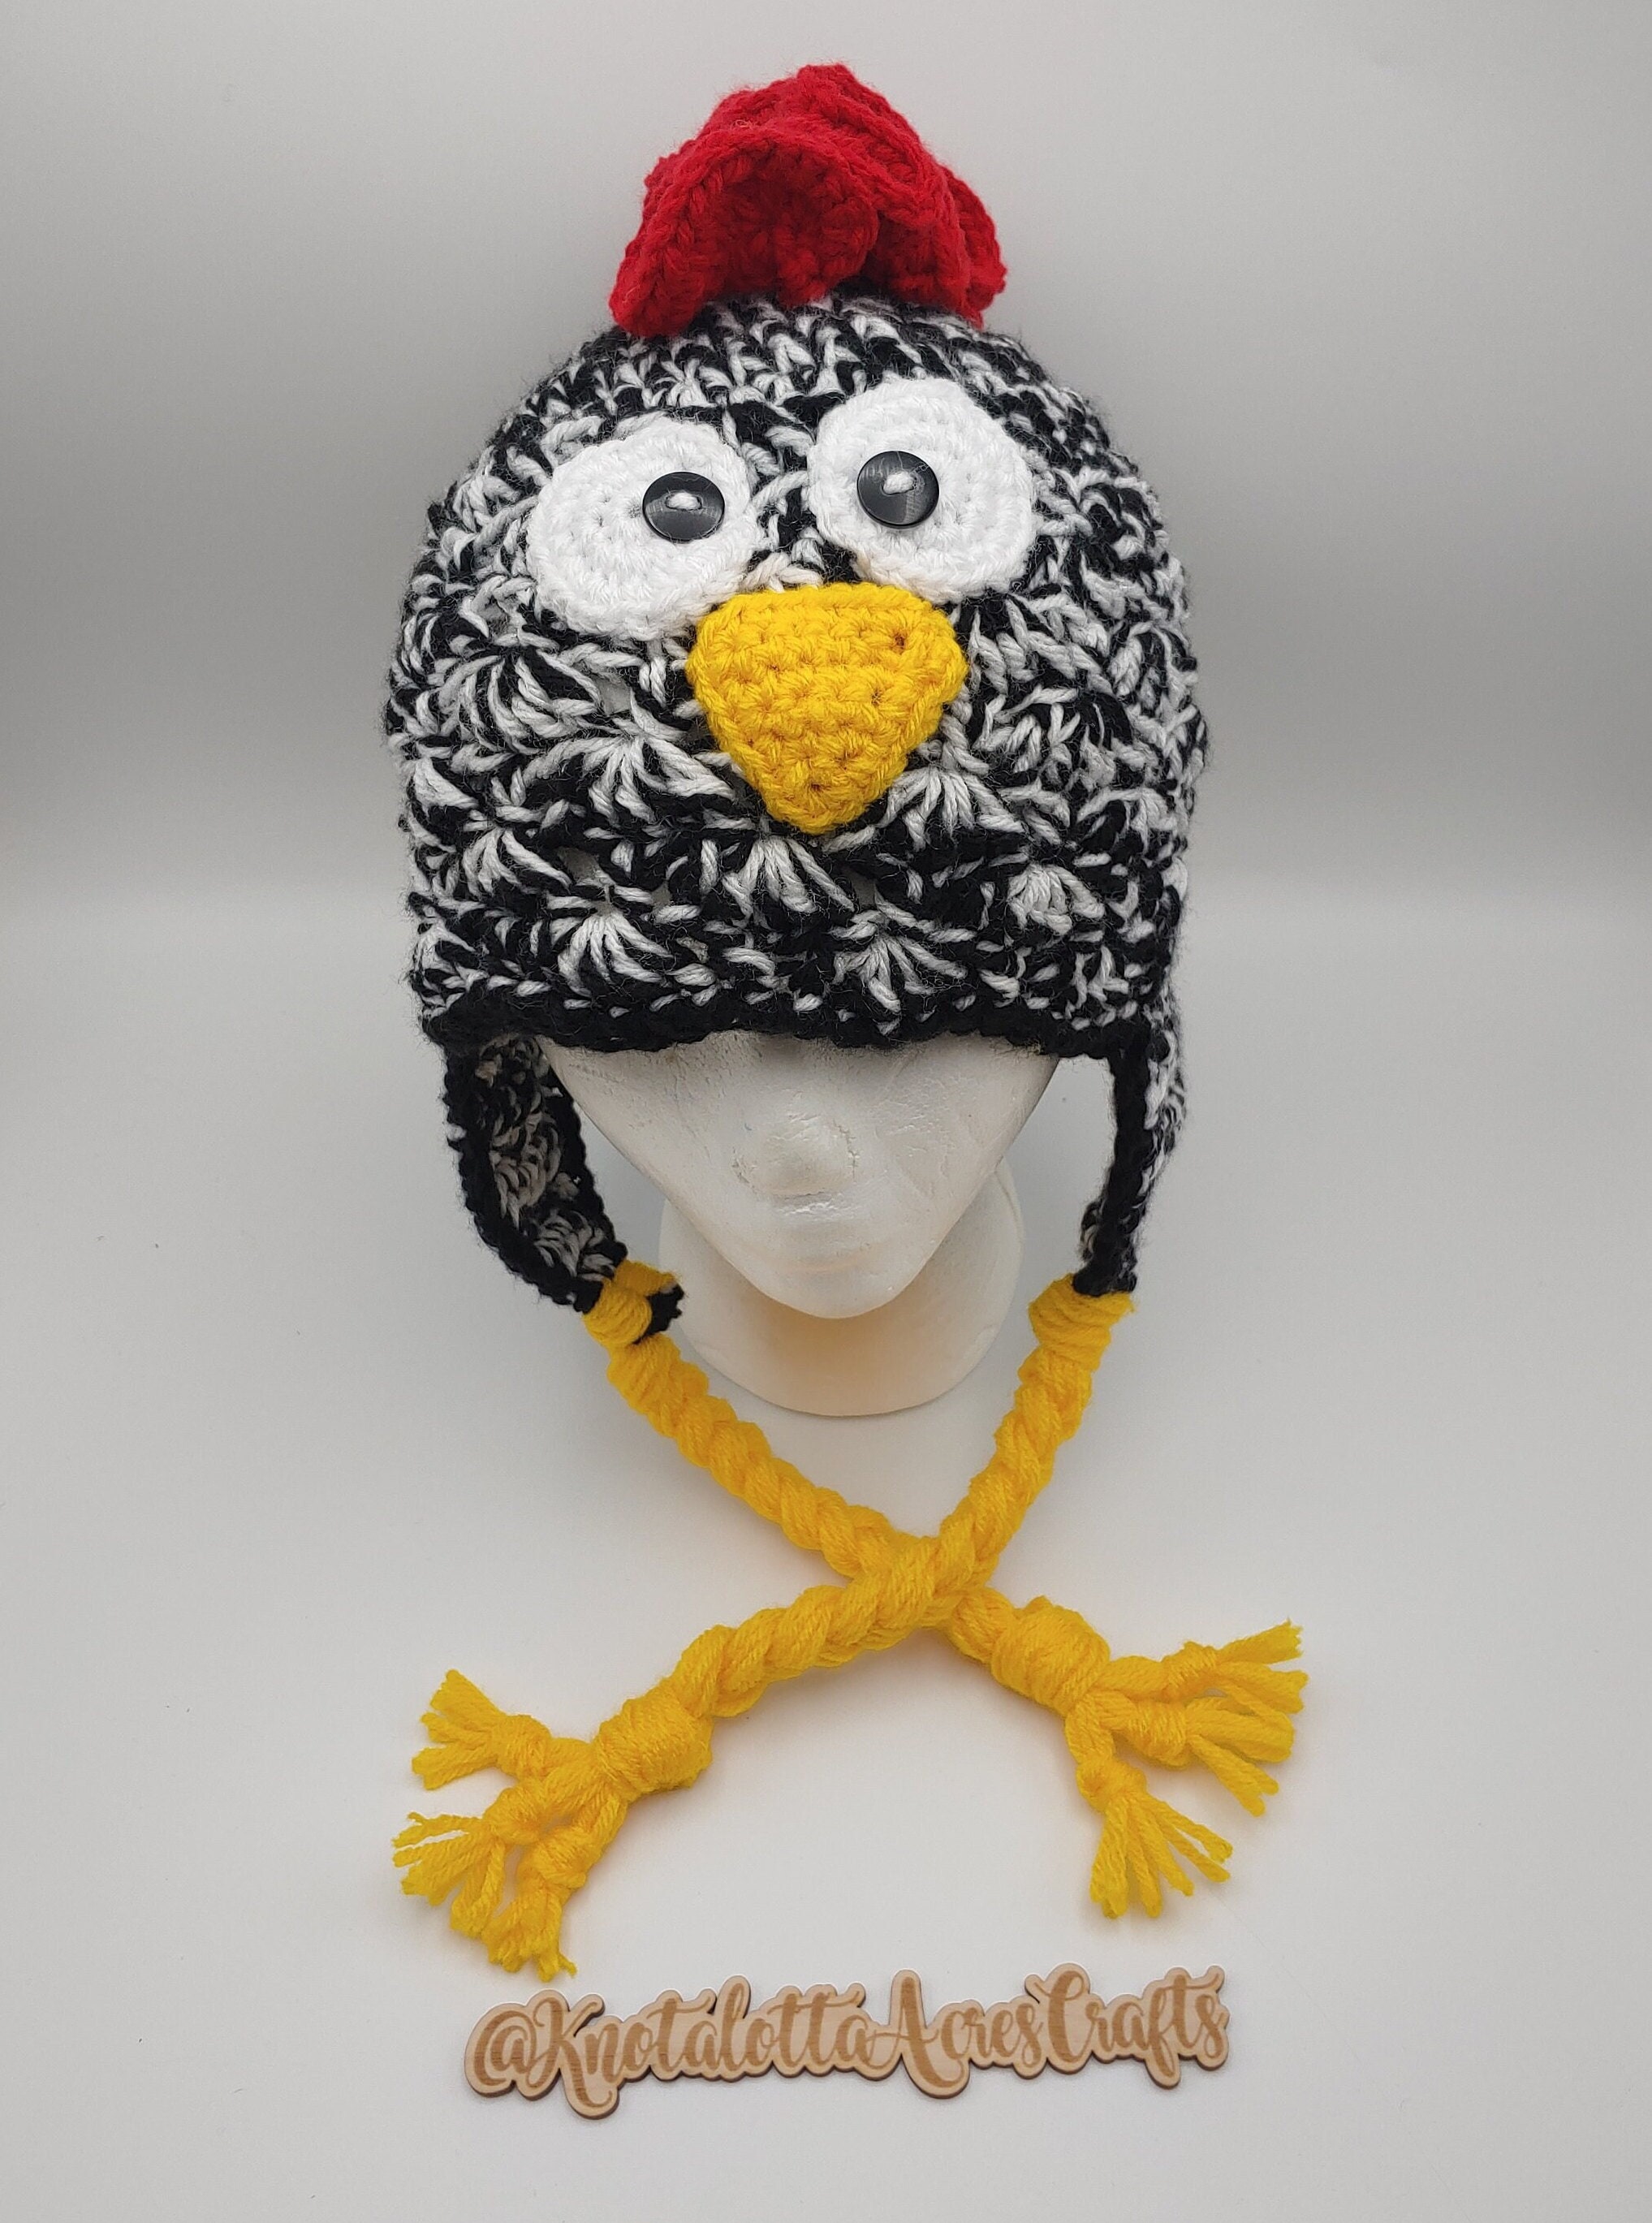 Knit Chicken or Sheep Hat, Striped Chicken Hat in Thaw and Glacier Beanie  Wool Blend Womens Adult Faux Fur Pom Hat 